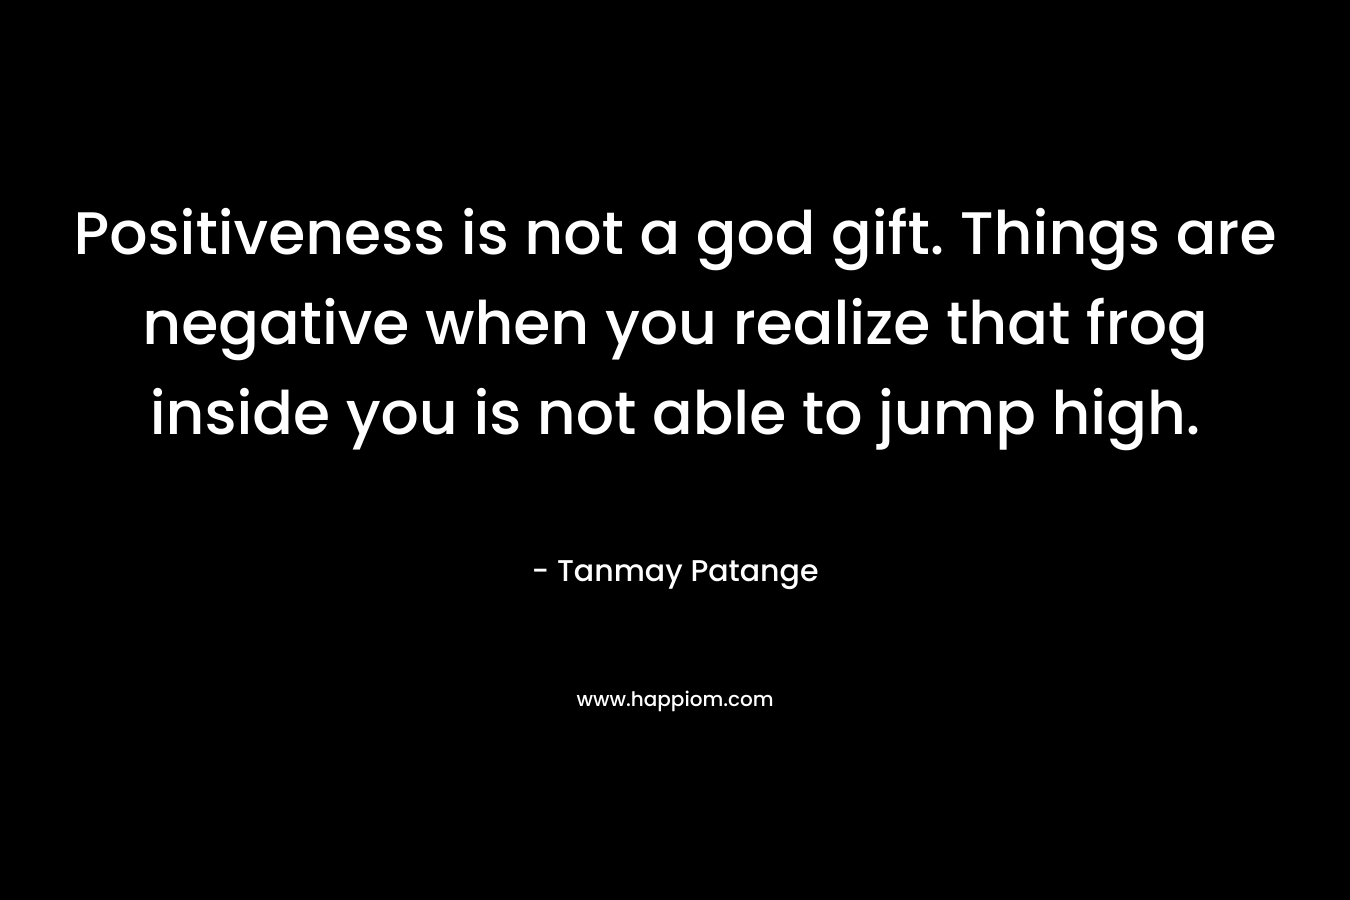 Positiveness is not a god gift. Things are negative when you realize that frog inside you is not able to jump high.